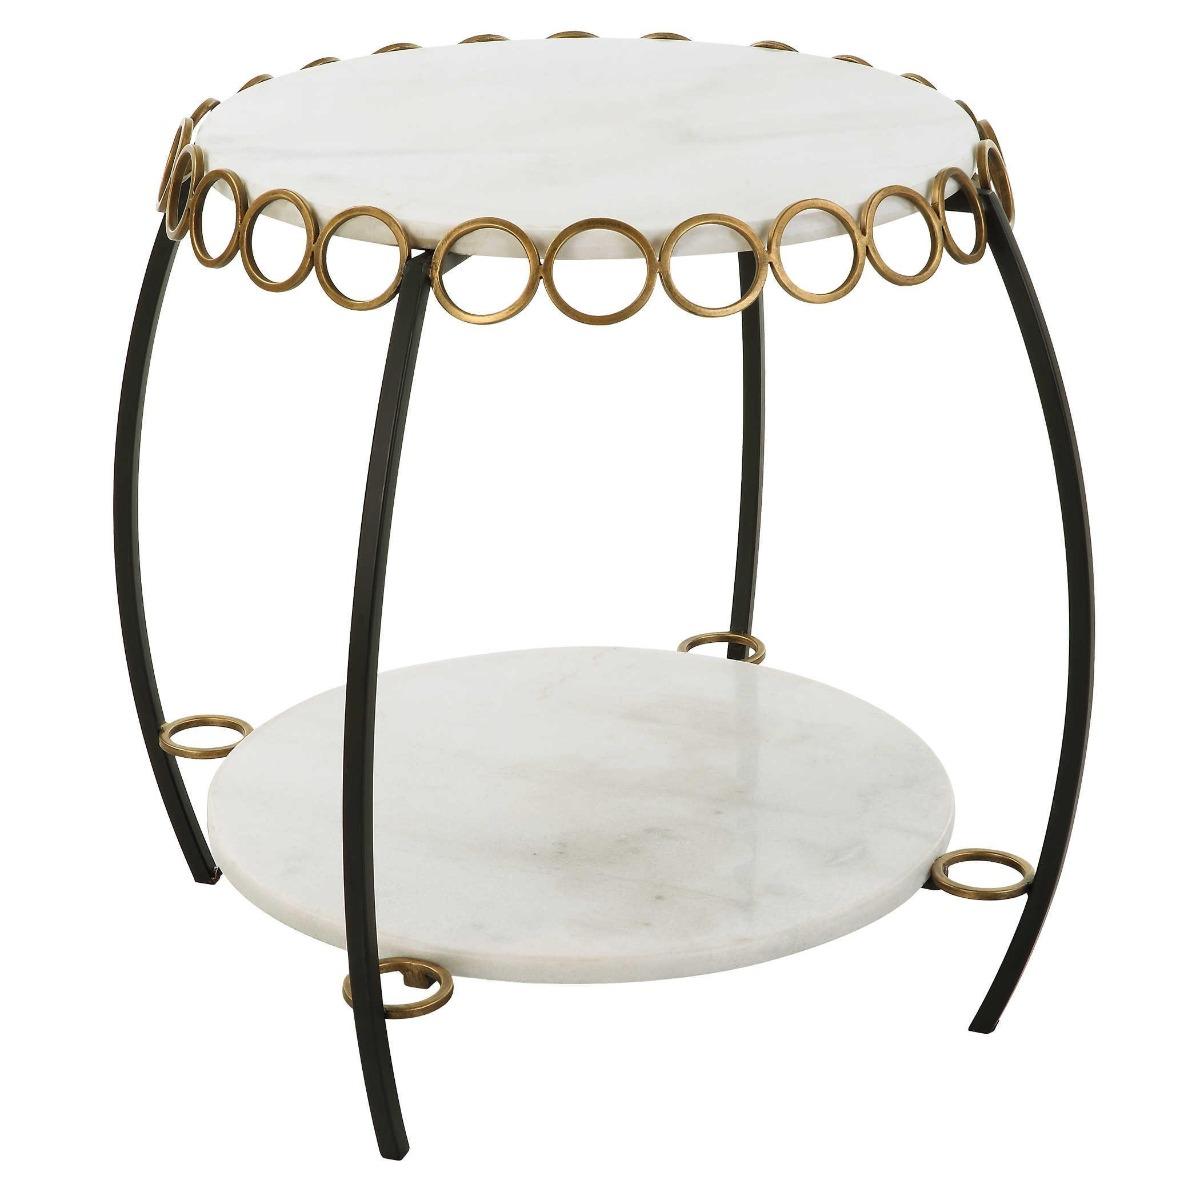 Uttermost Chainlink White Marble Side Table